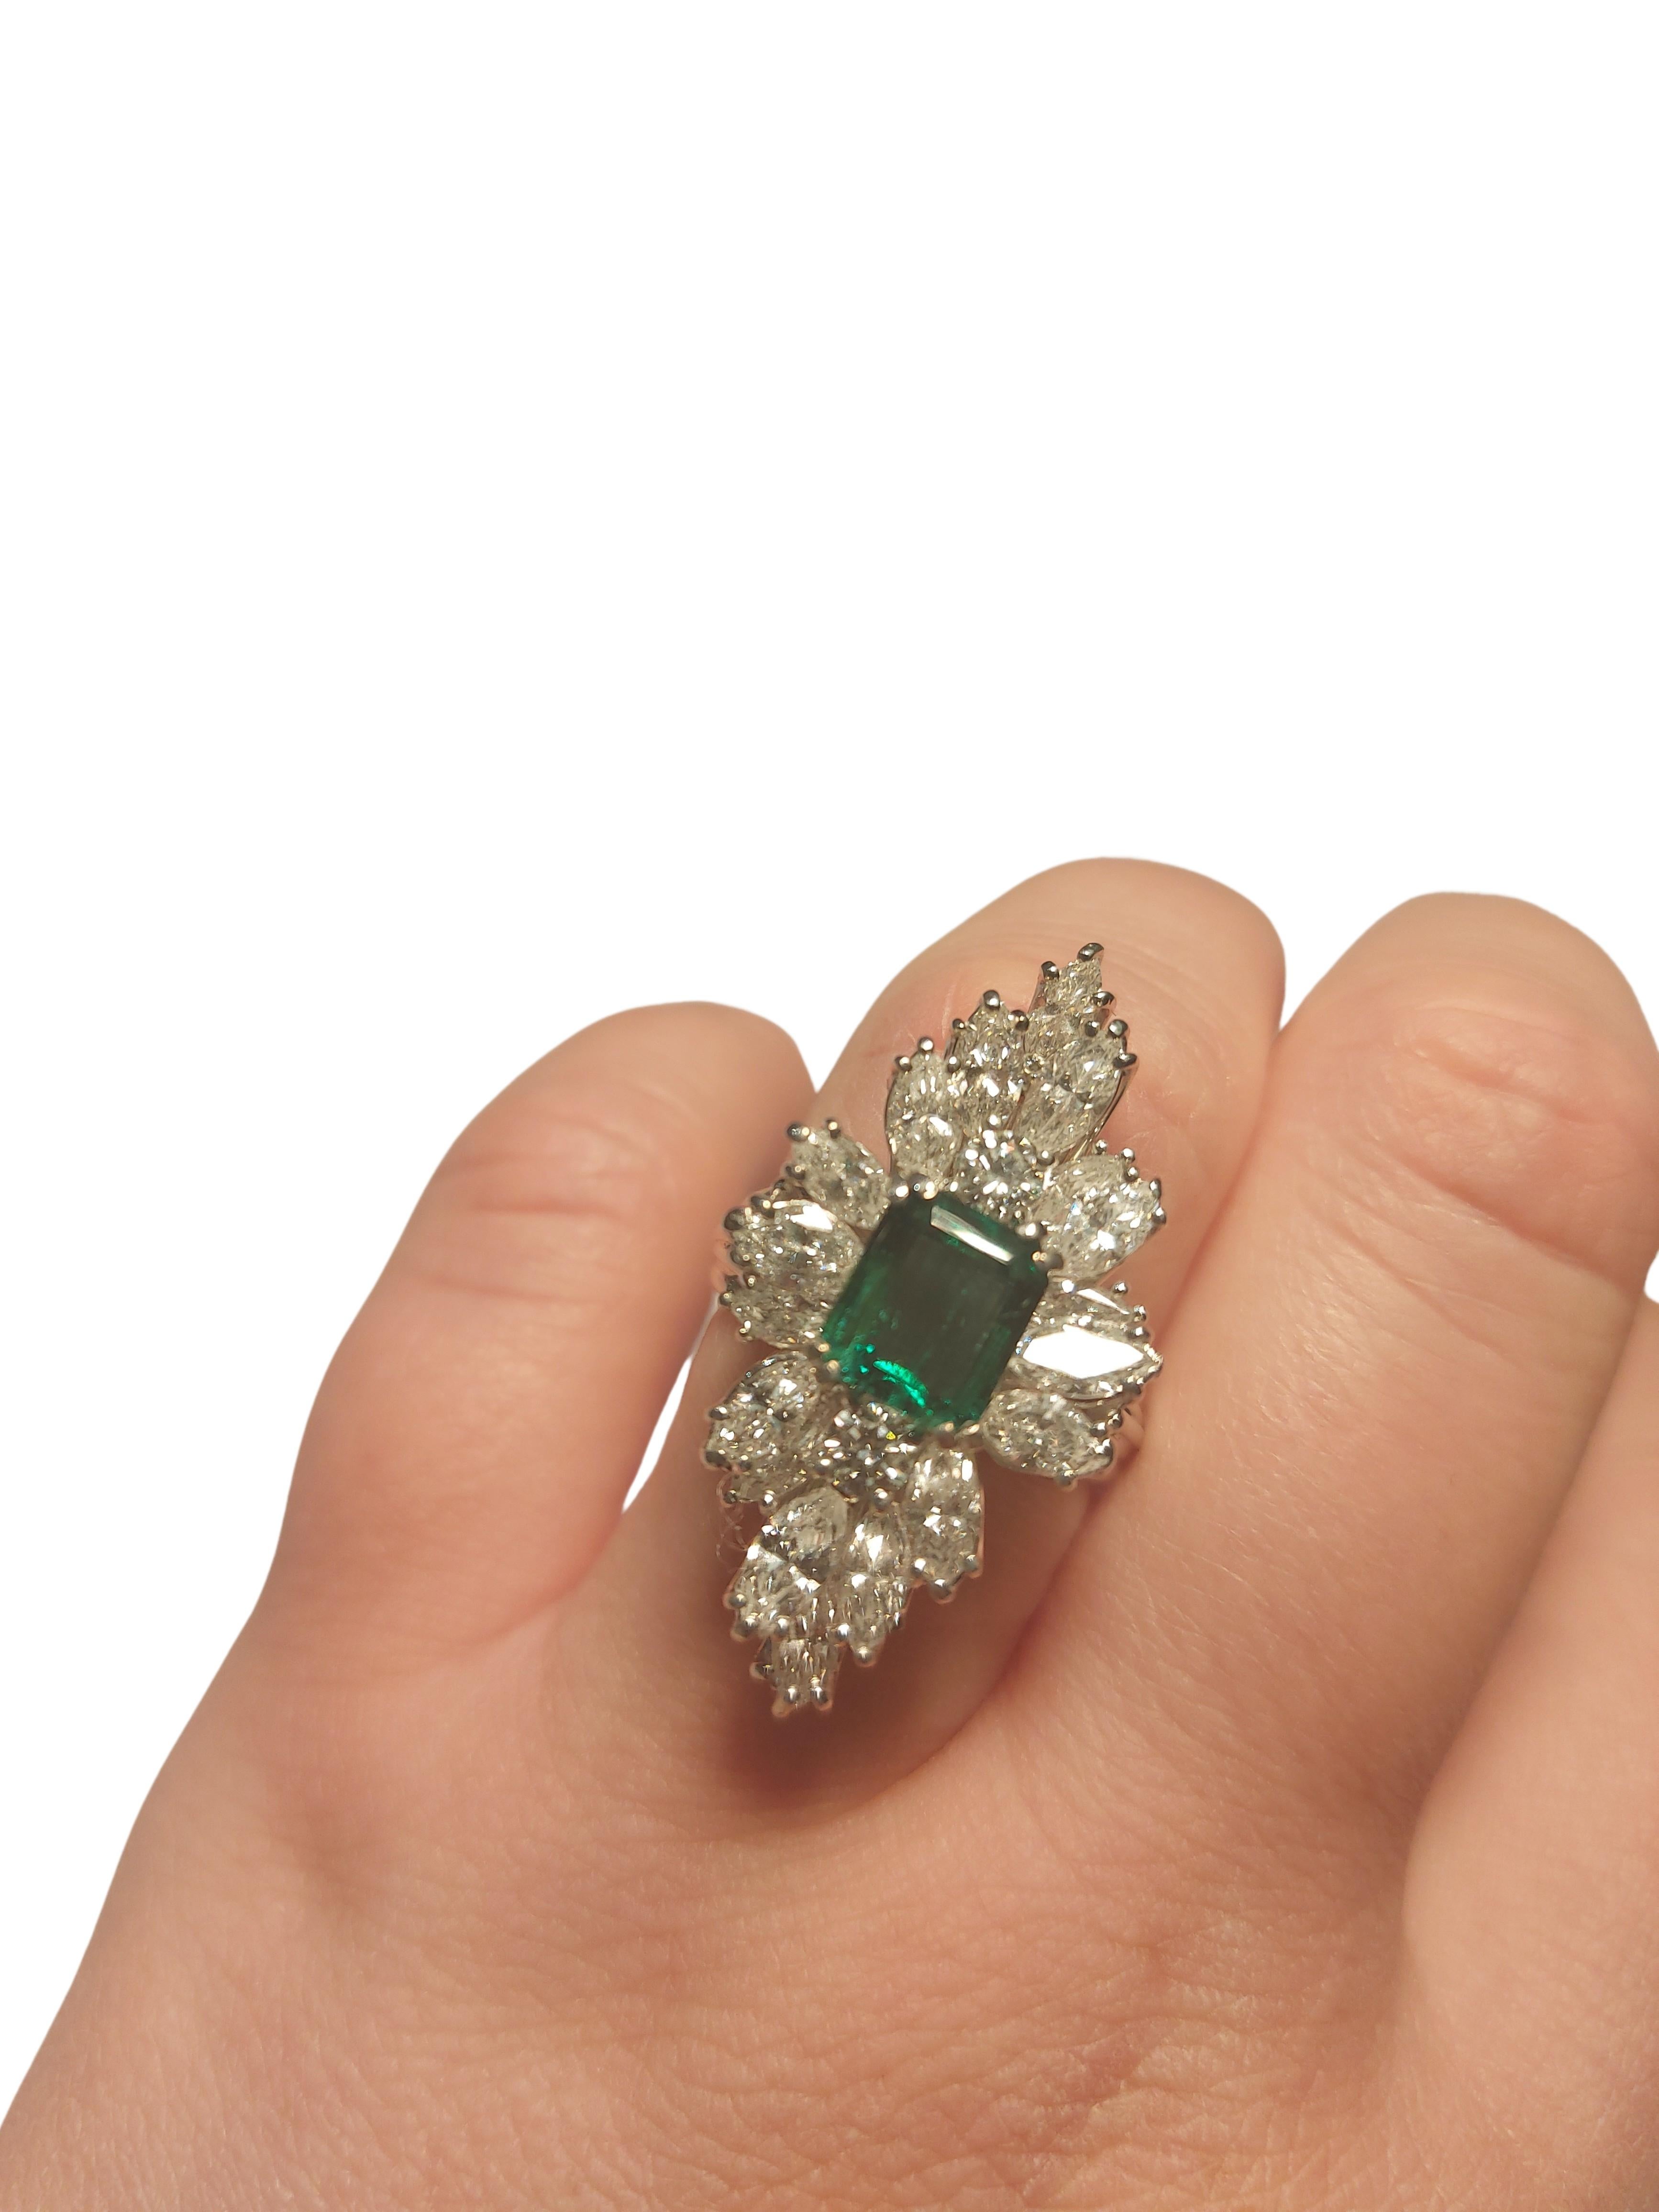 18kt White Gold Ring with 1.49 Ct Emerald Stone Surrounded by Diamonds For Sale 5